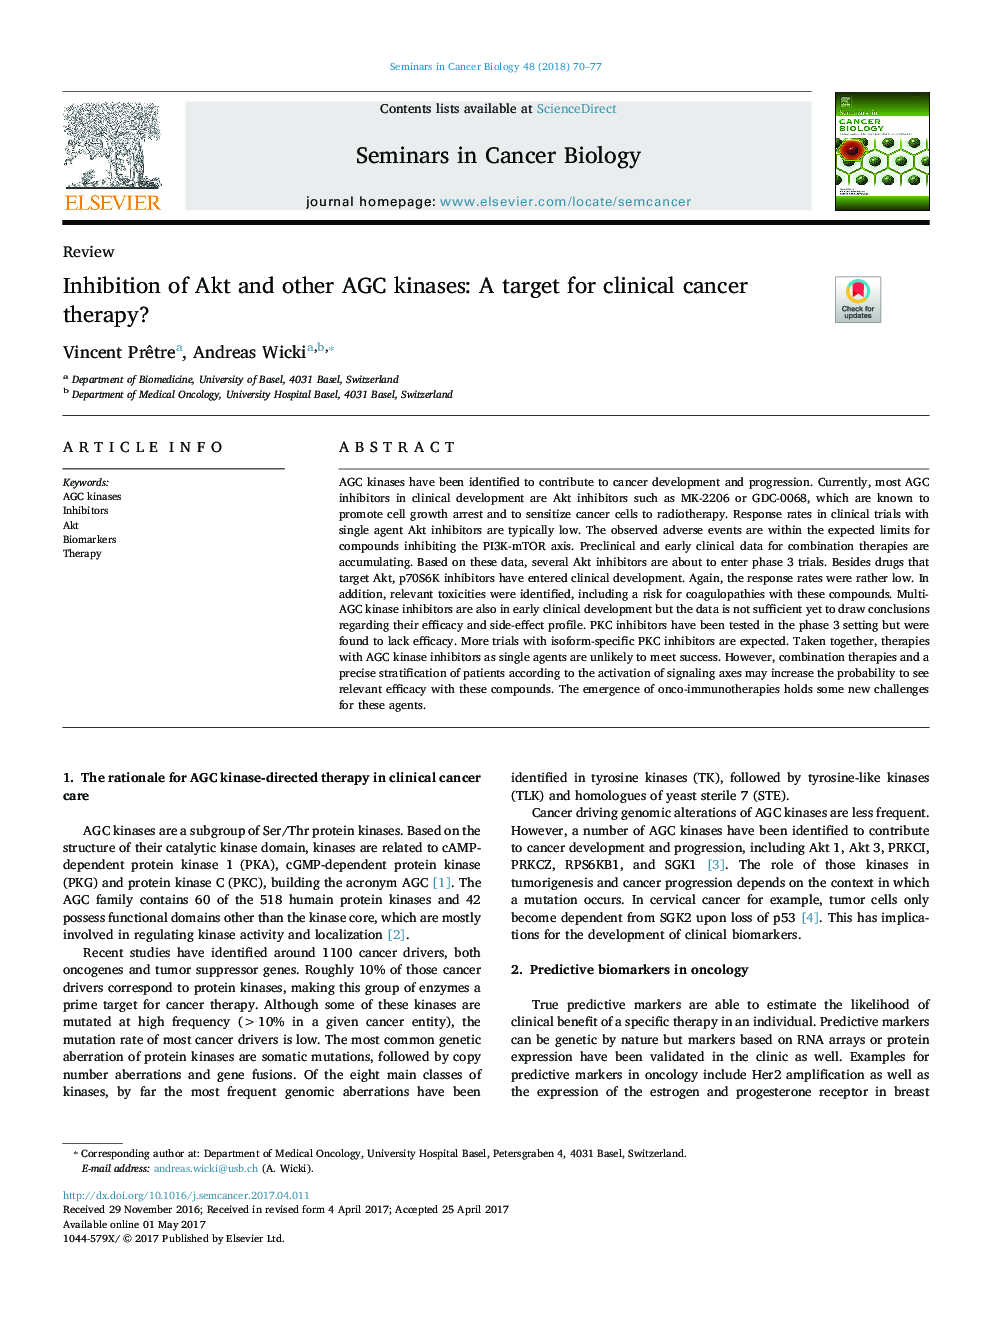 Inhibition of Akt and other AGC kinases: A target for clinical cancer therapy?